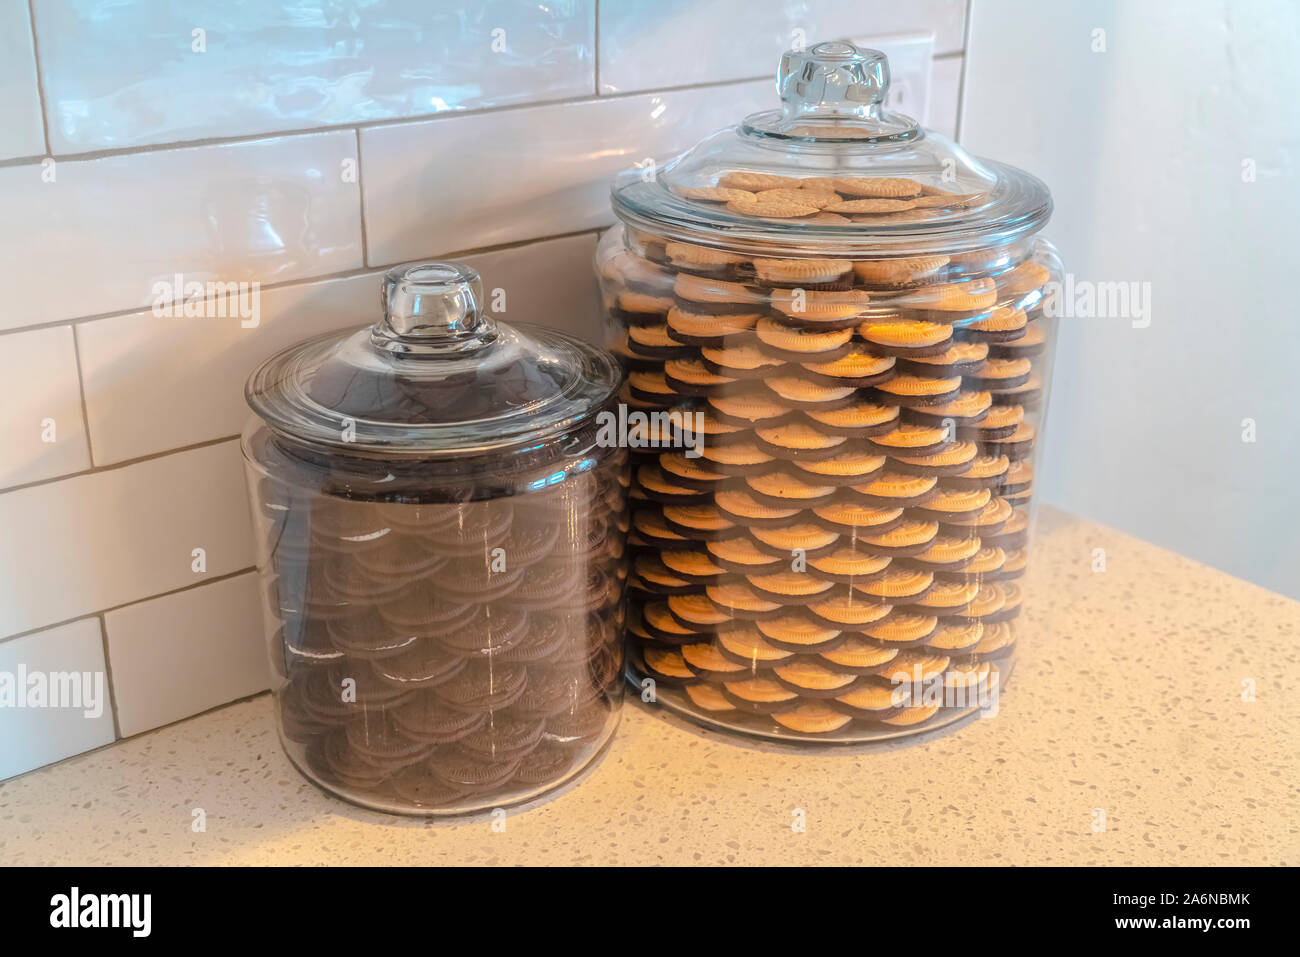 https://c8.alamy.com/comp/2A6NBMK/glass-storage-jars-filled-with-cookies-in-kitchen-2A6NBMK.jpg